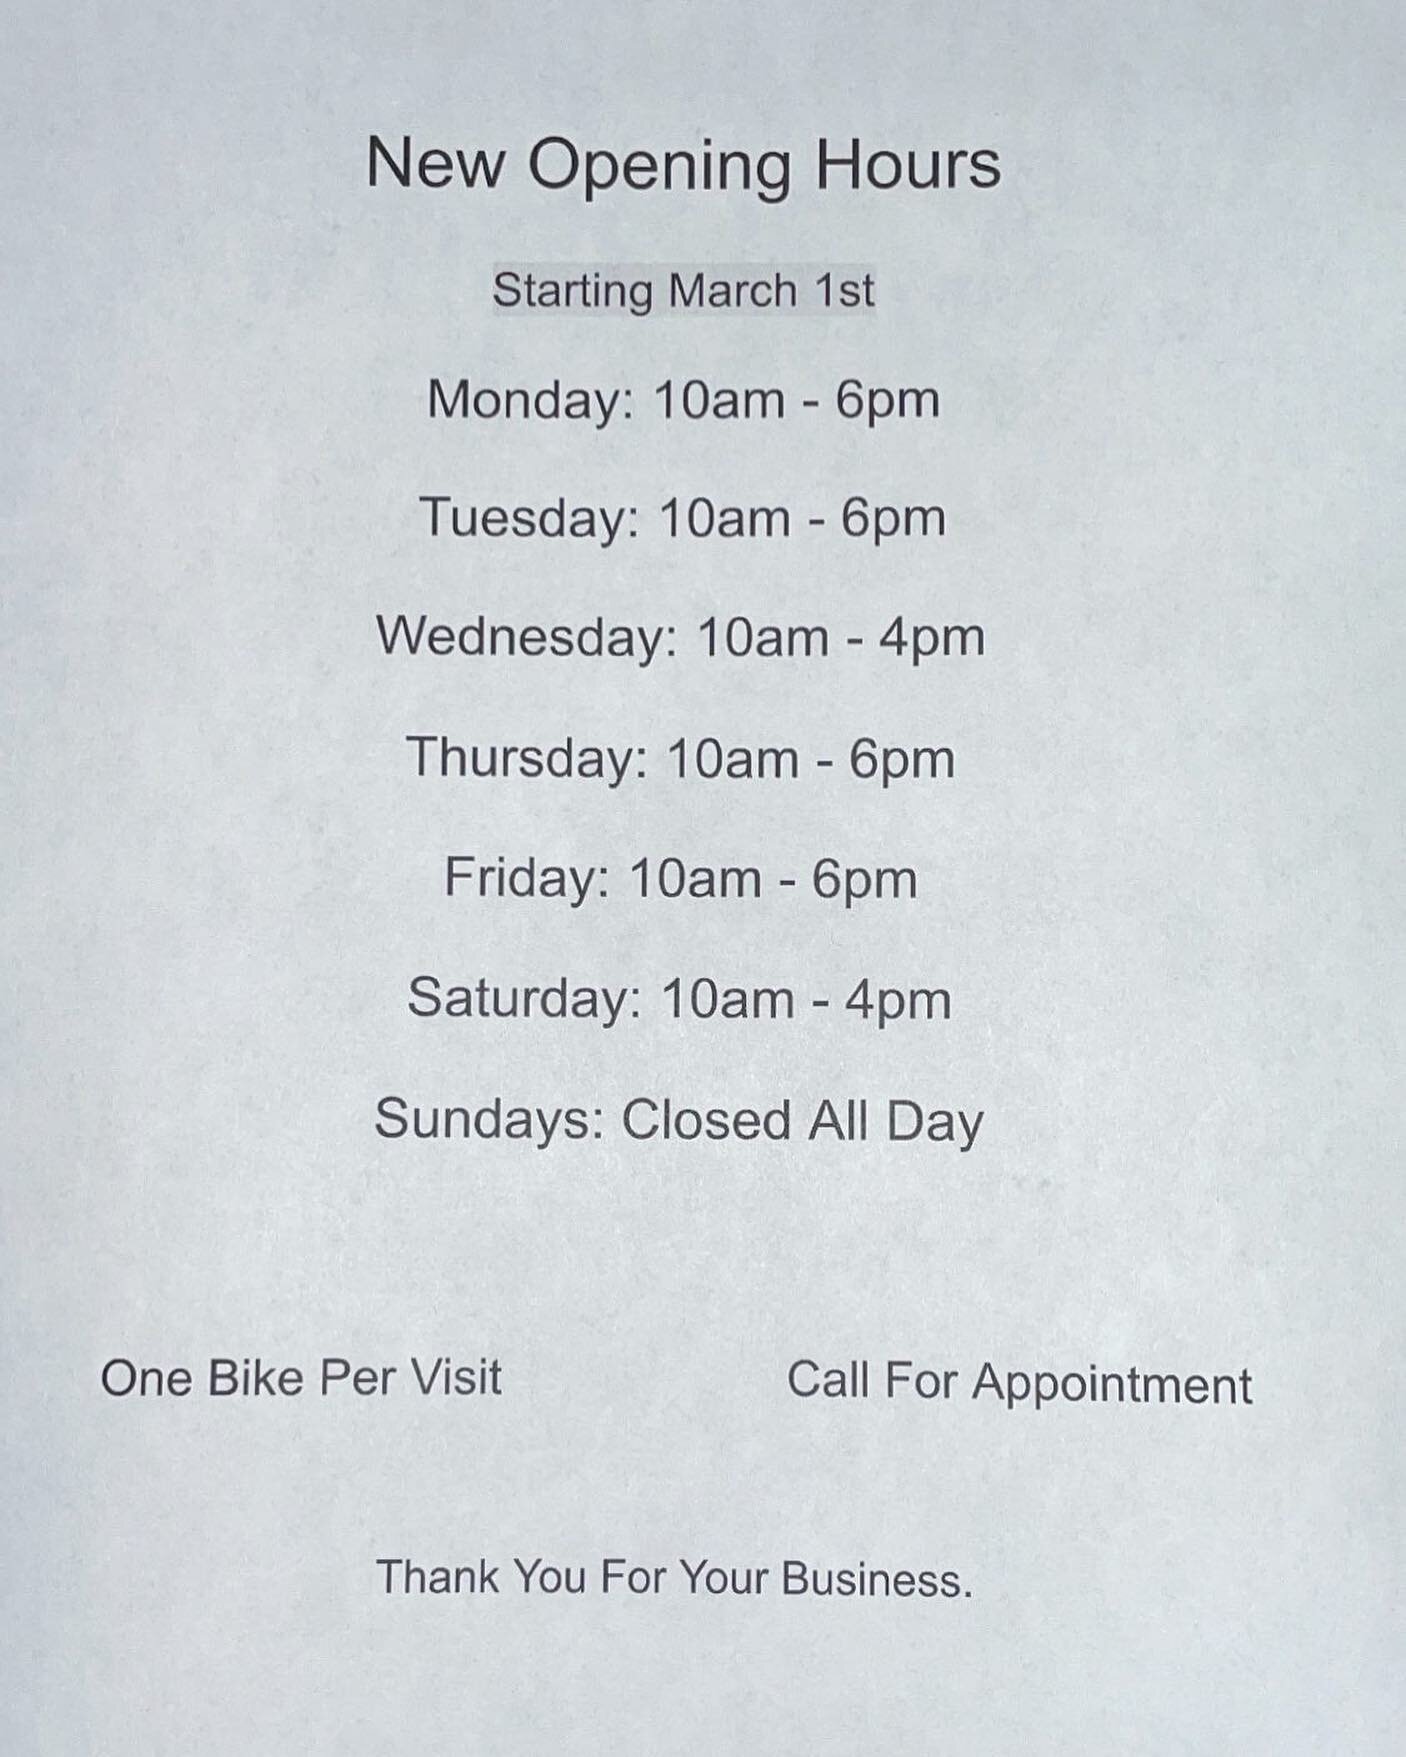 New shop hours starting March 1st #cycling